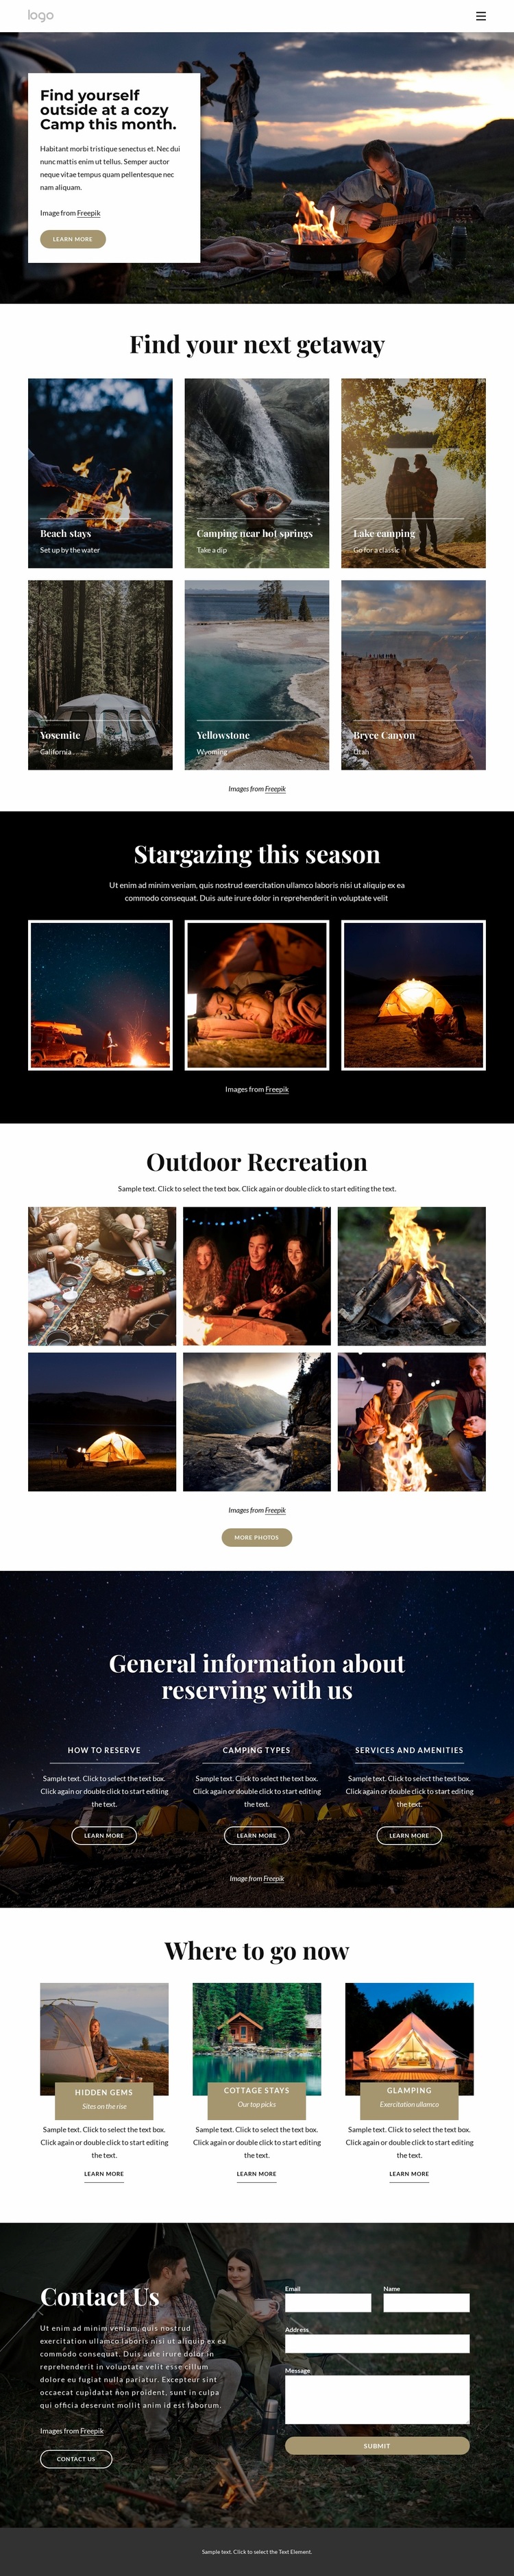 Going on a camping trip Website Design